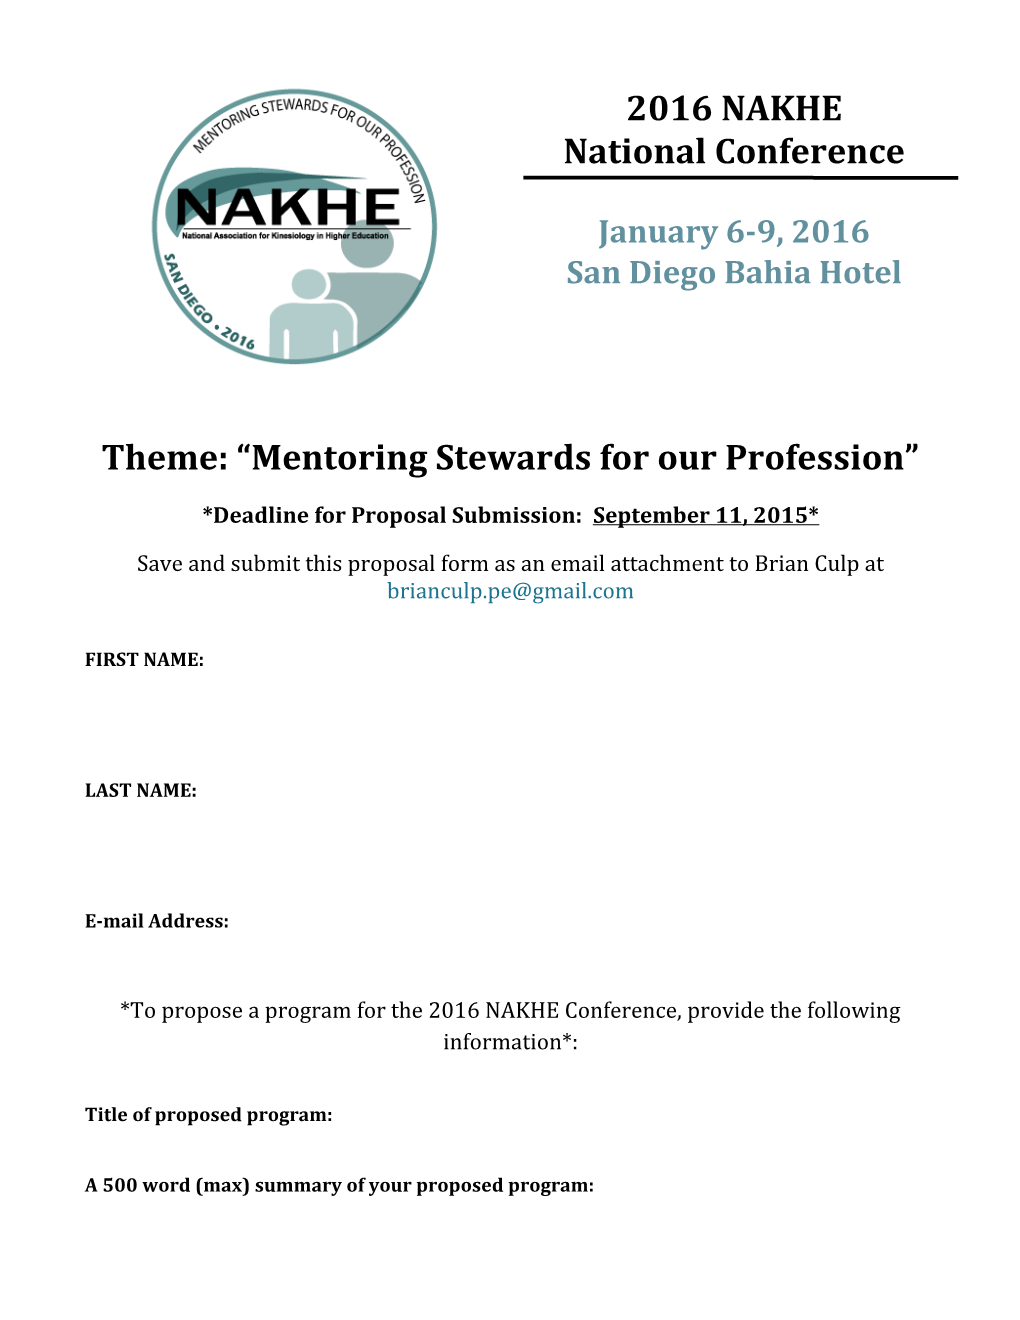 Theme: Mentoring Stewards for Our Profession